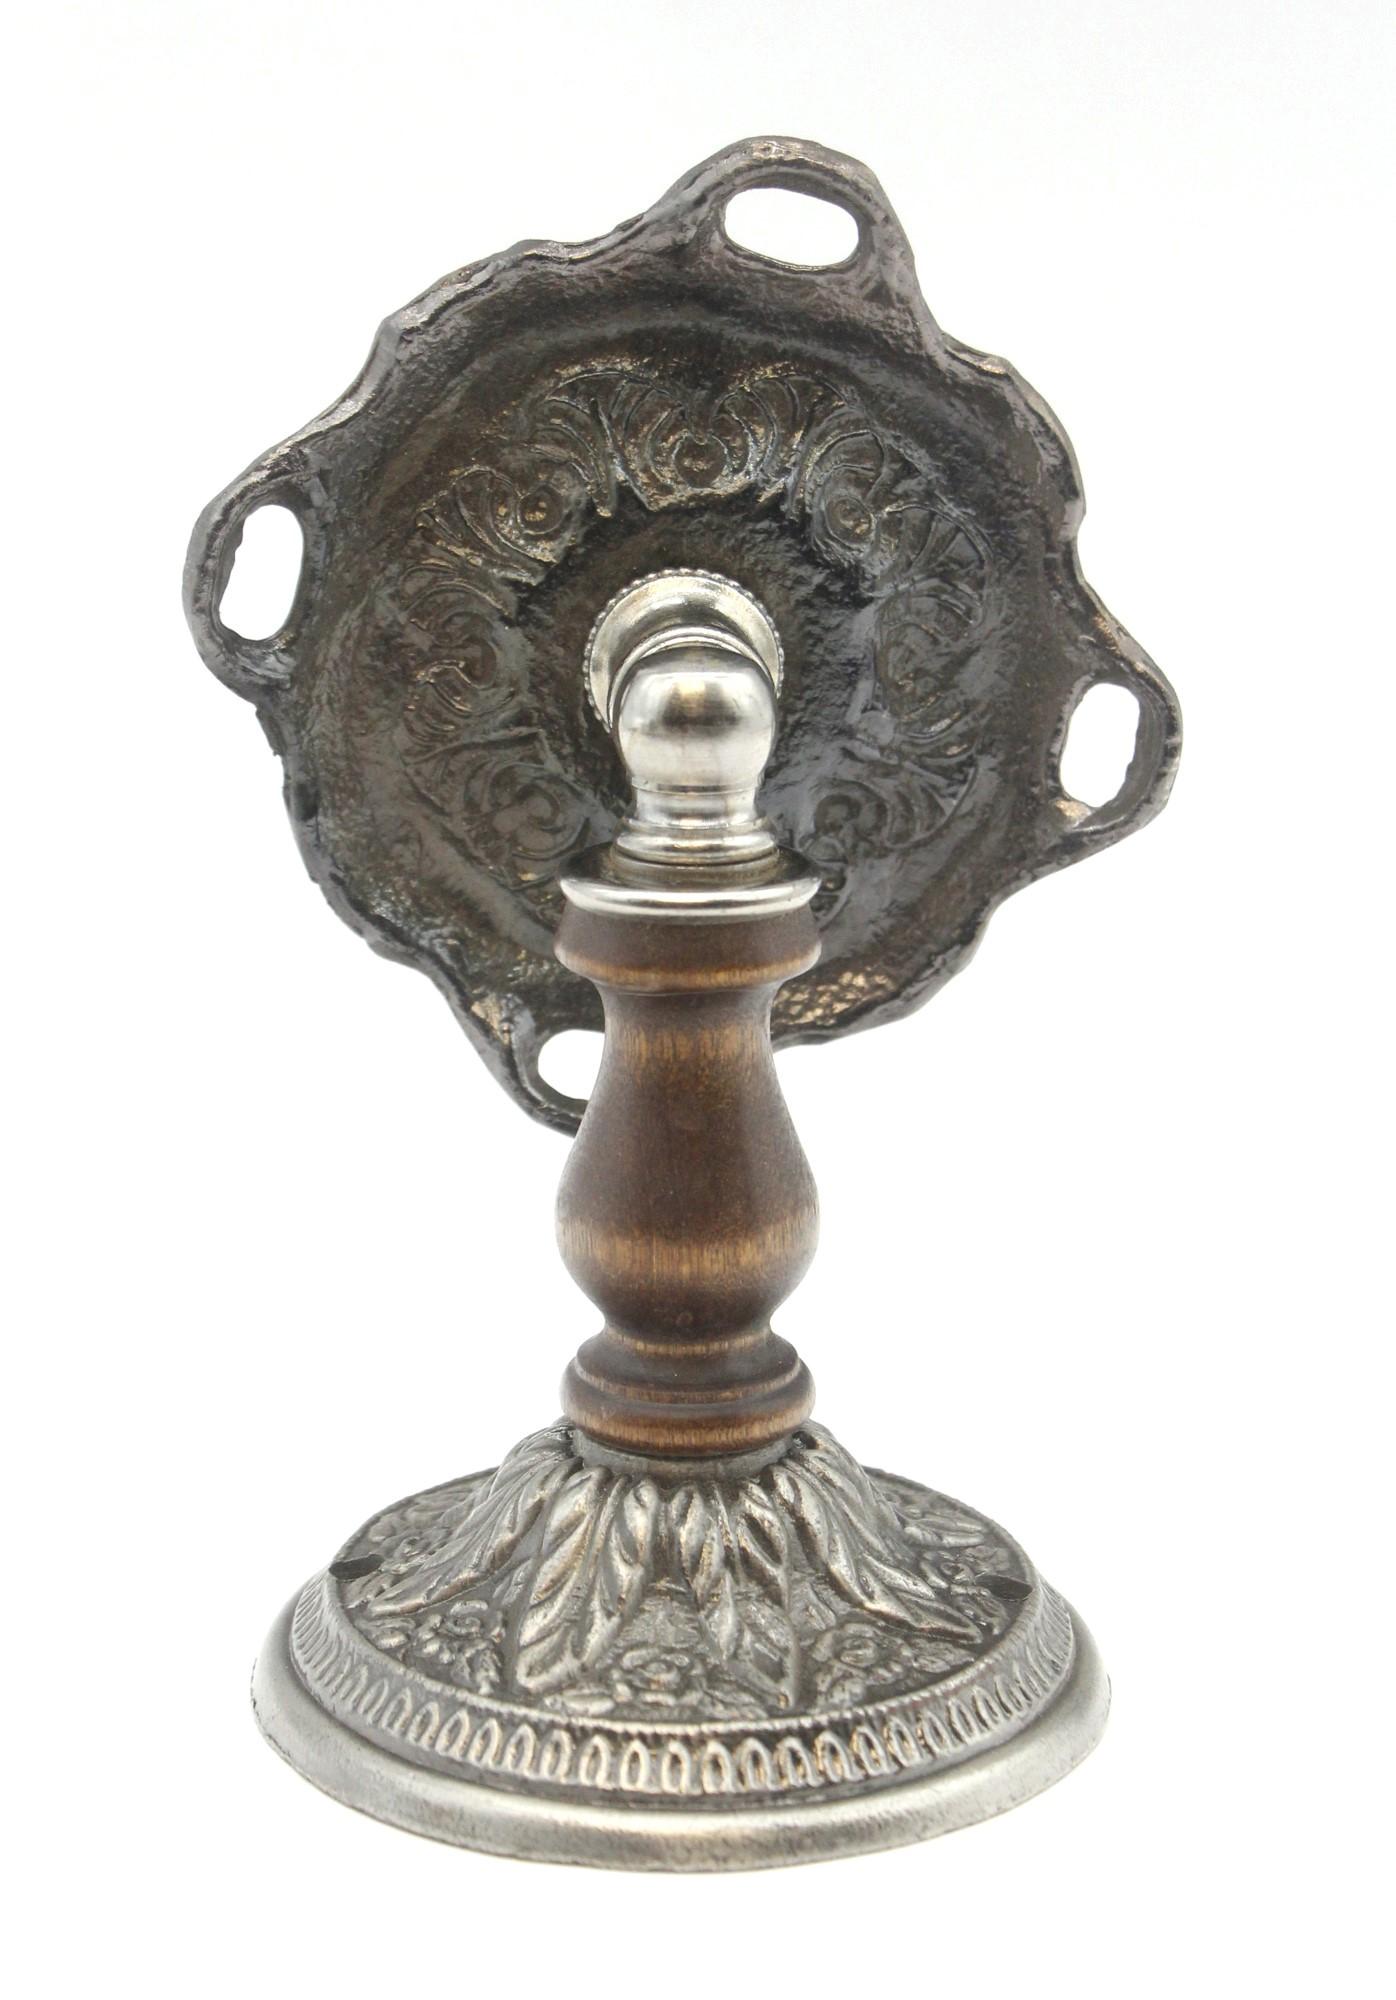 Nickel Plated Brass + Wood Toothbrush Cup Wall Holder with a Floral Design 1